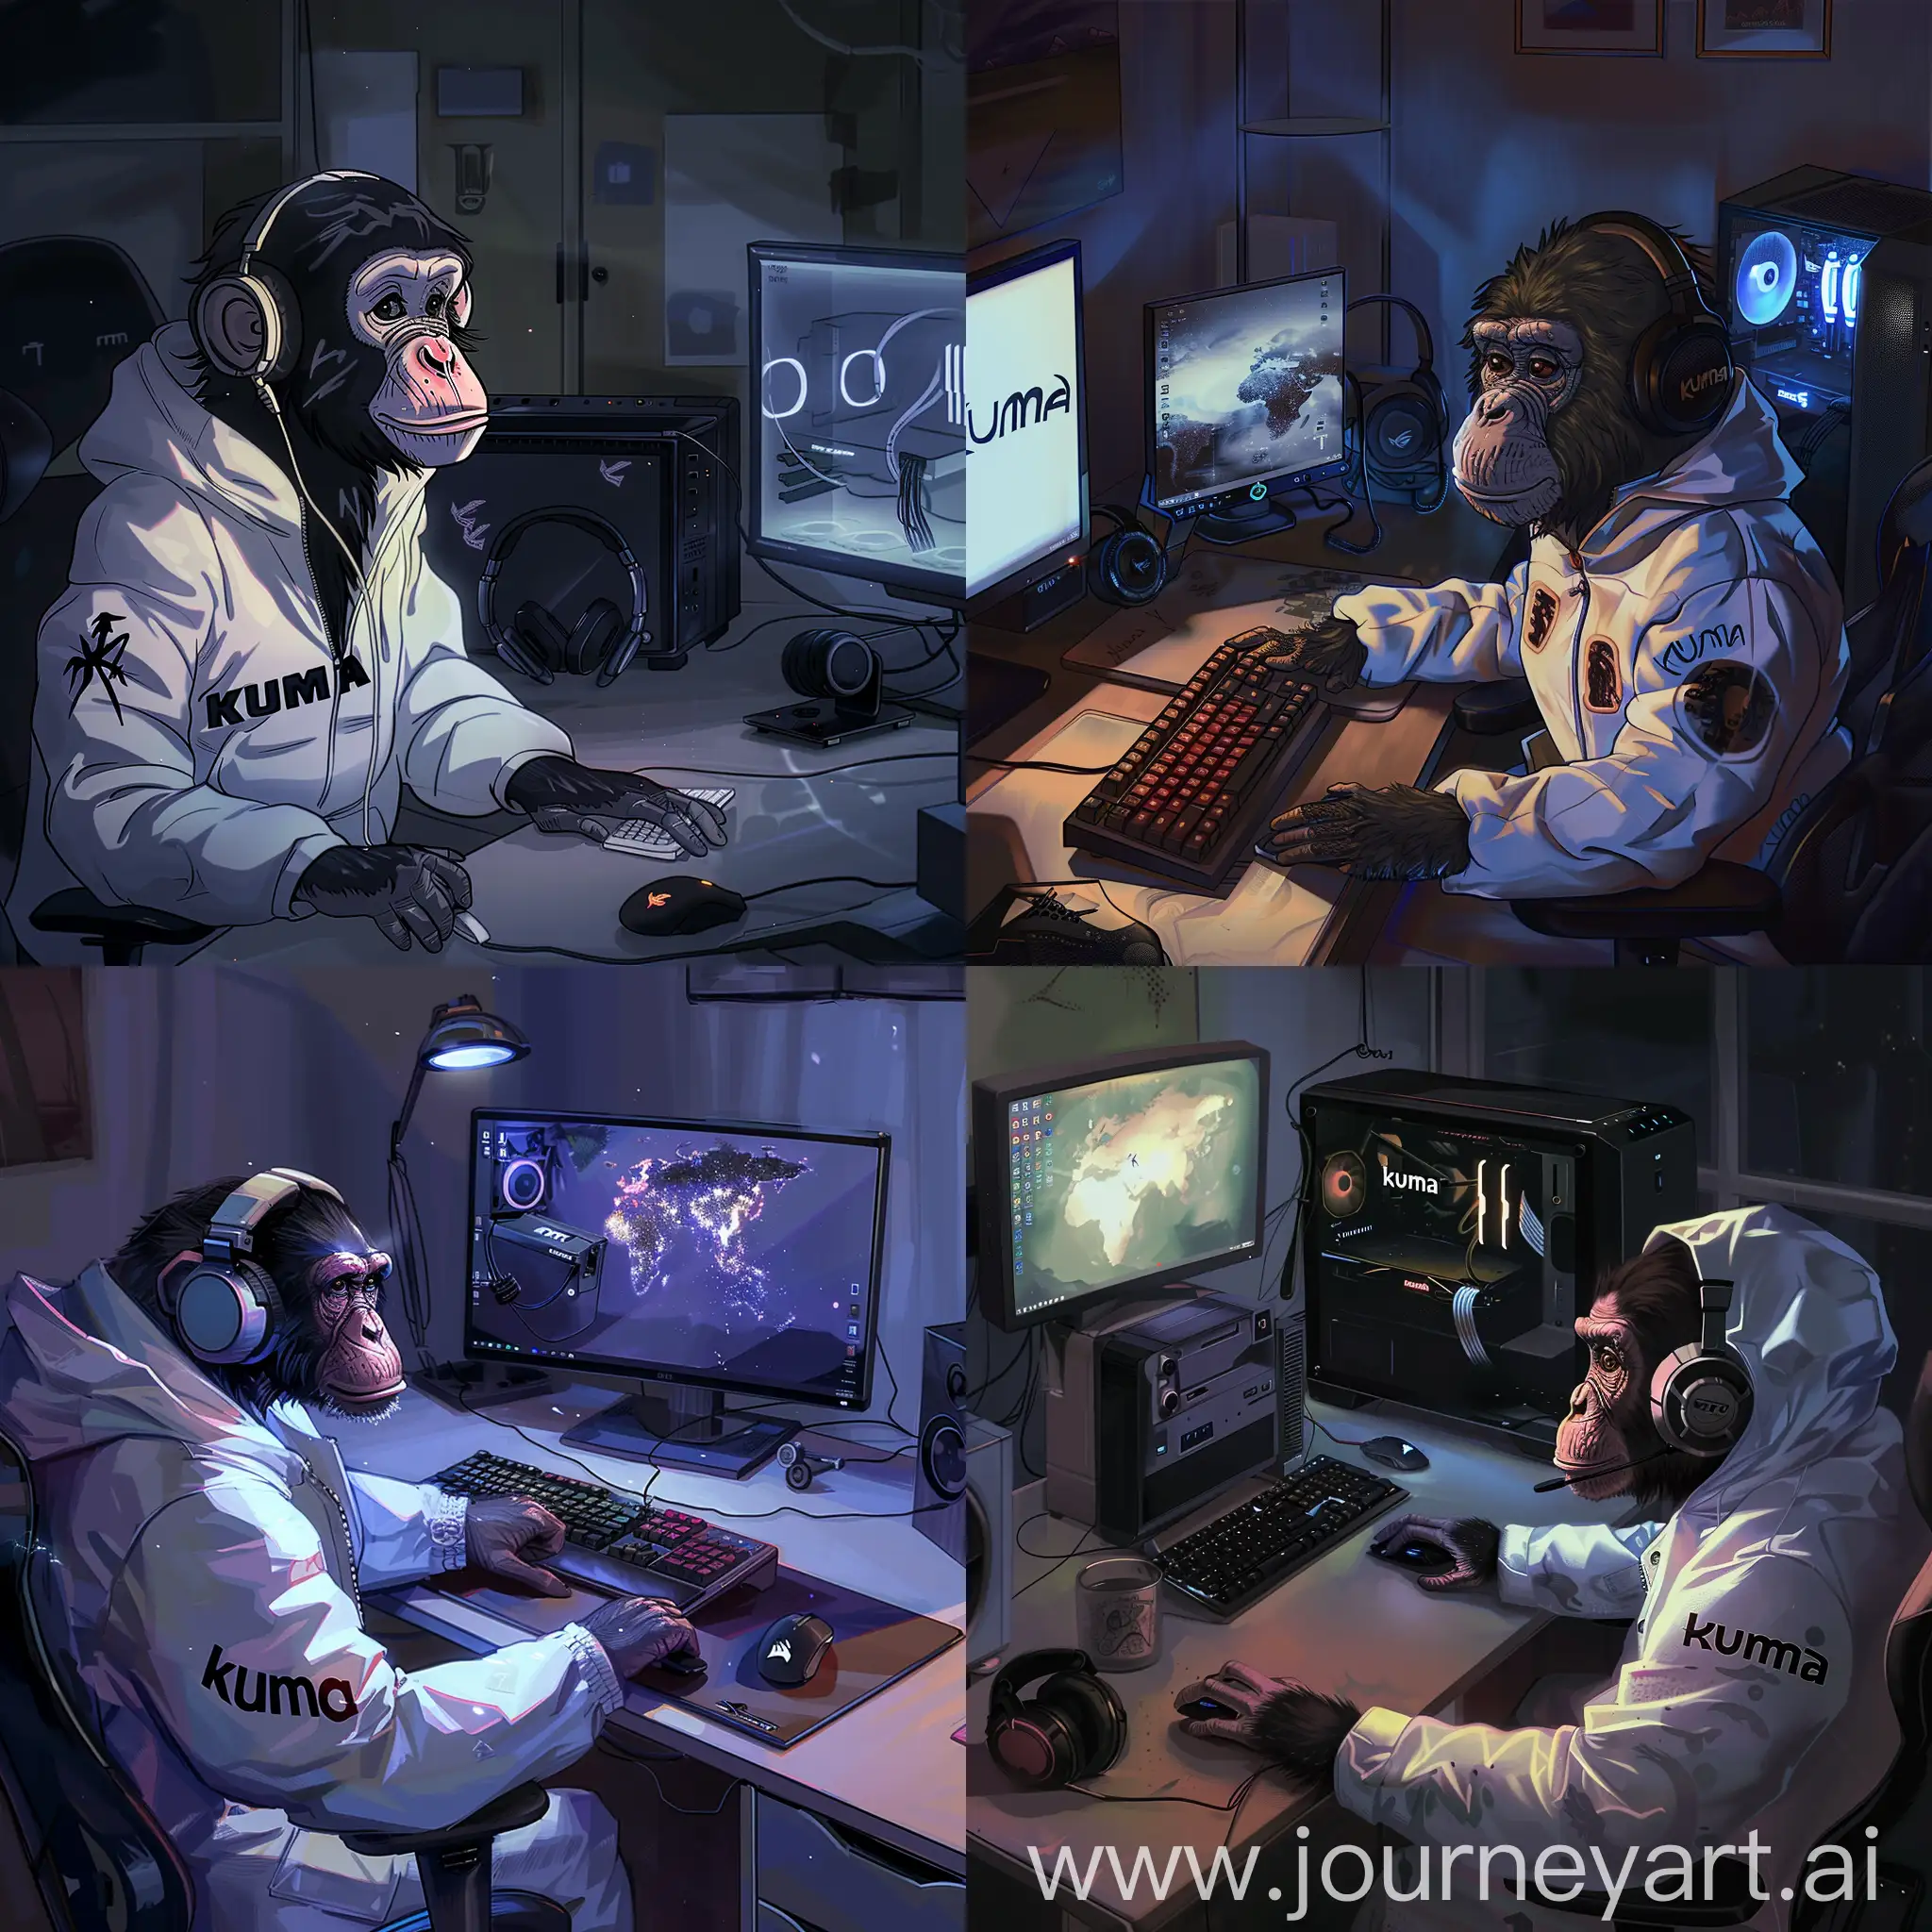 a monkey in a white jacket and the inscription “kuma” on it, she also sits at a computer desk and you can see a monitor and next to a headset, a keyboard and a mouse and a gaming PC, then she sits and the room is dark